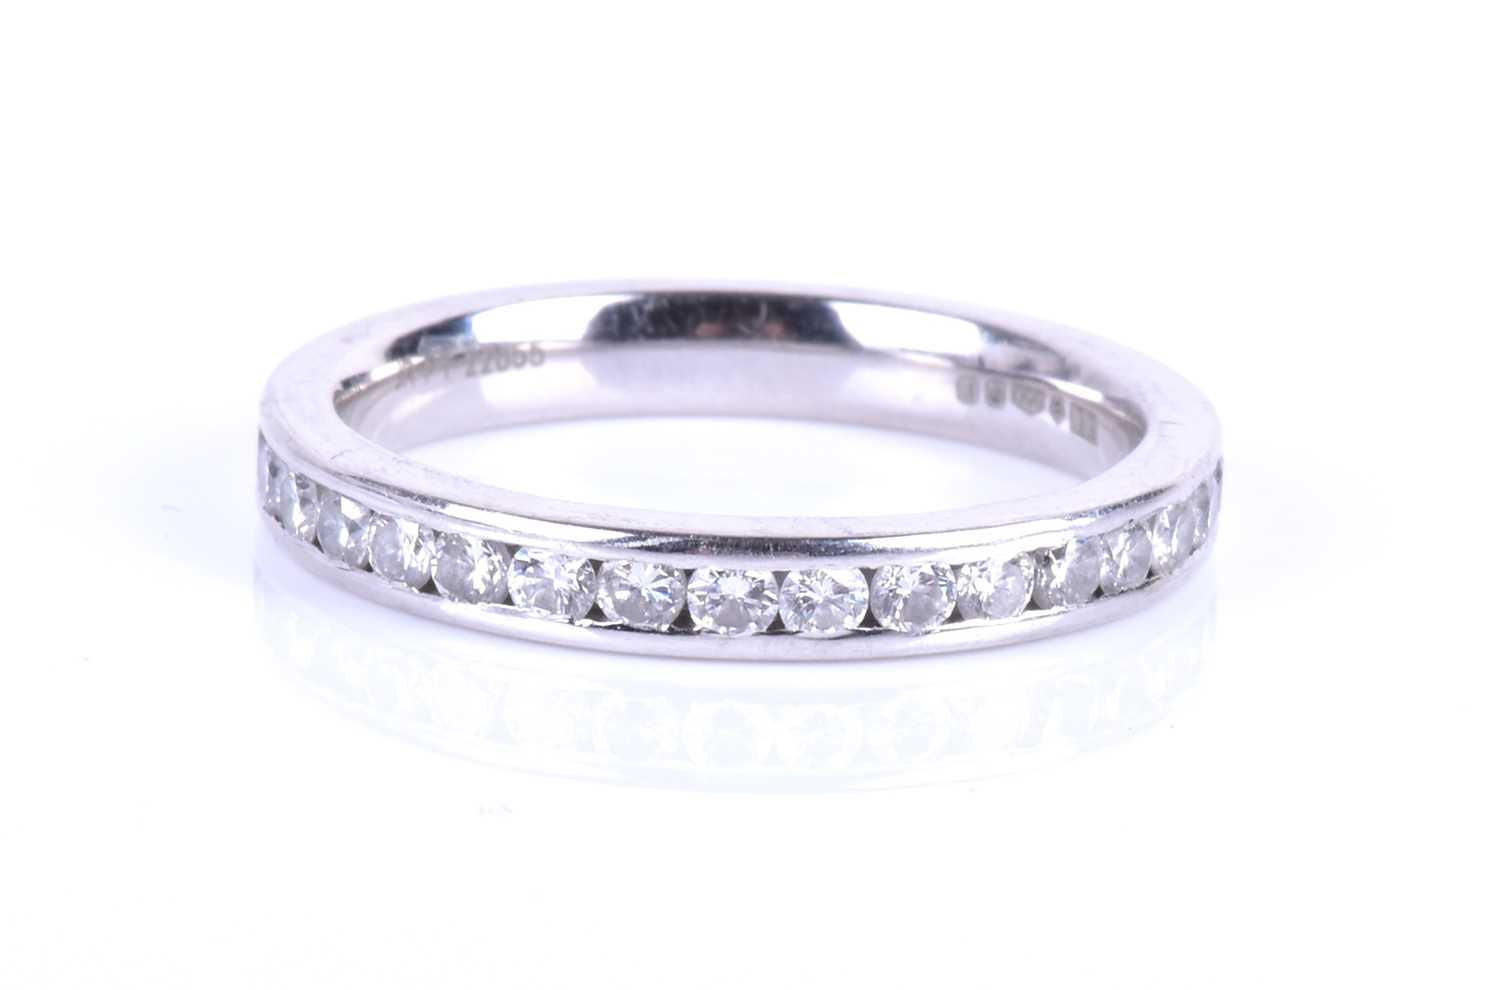 A platinum and diamond eternity ring, channel-set with round brilliant-cut diamonds of approximately - Image 3 of 5